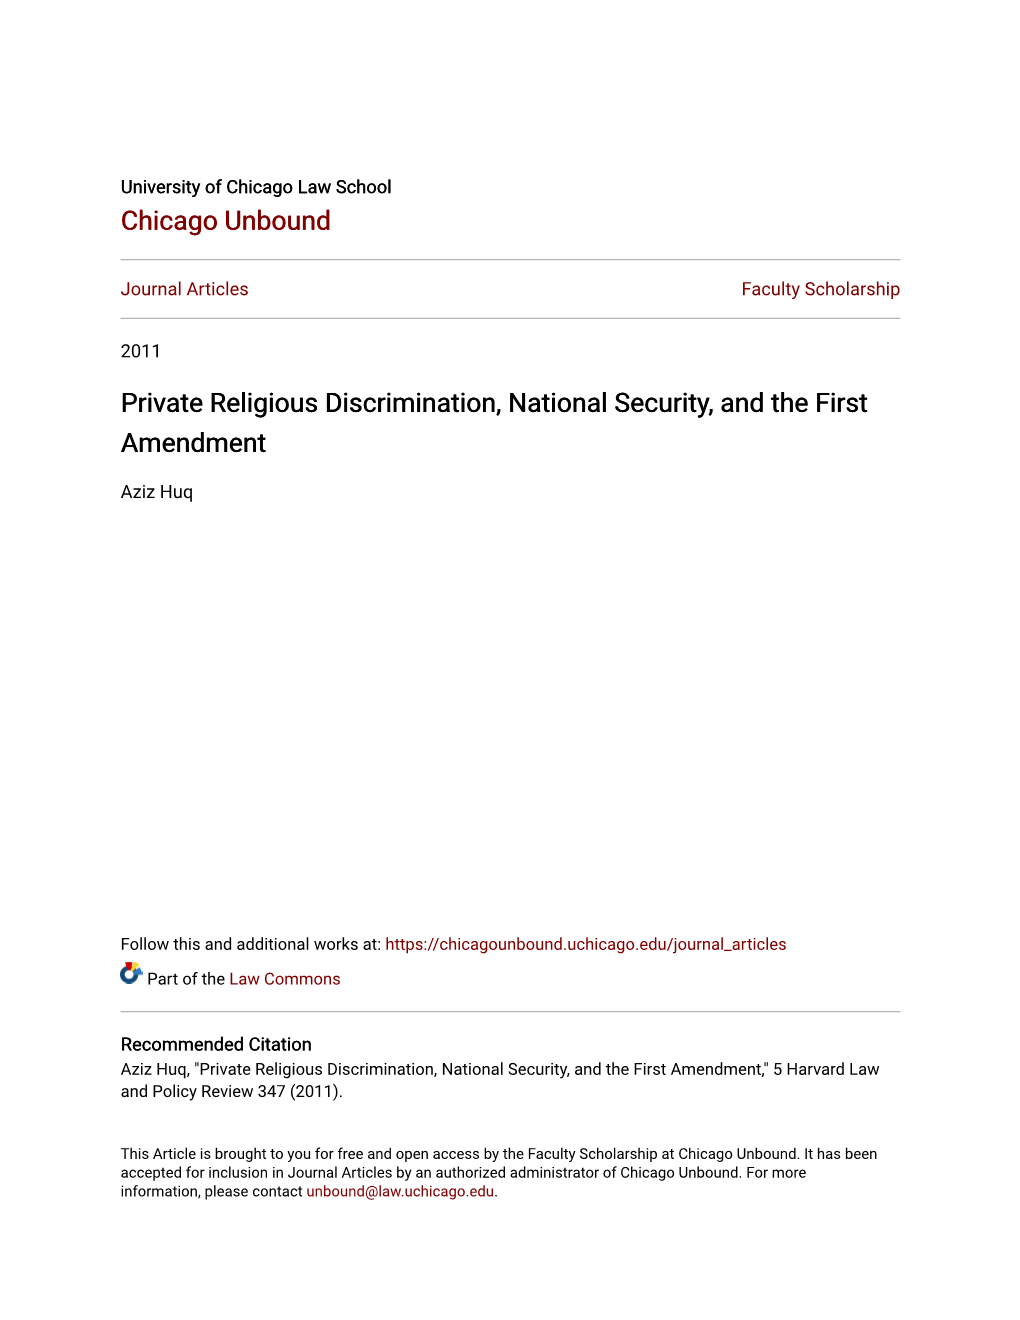 Private Religious Discrimination, National Security, and the First Amendment